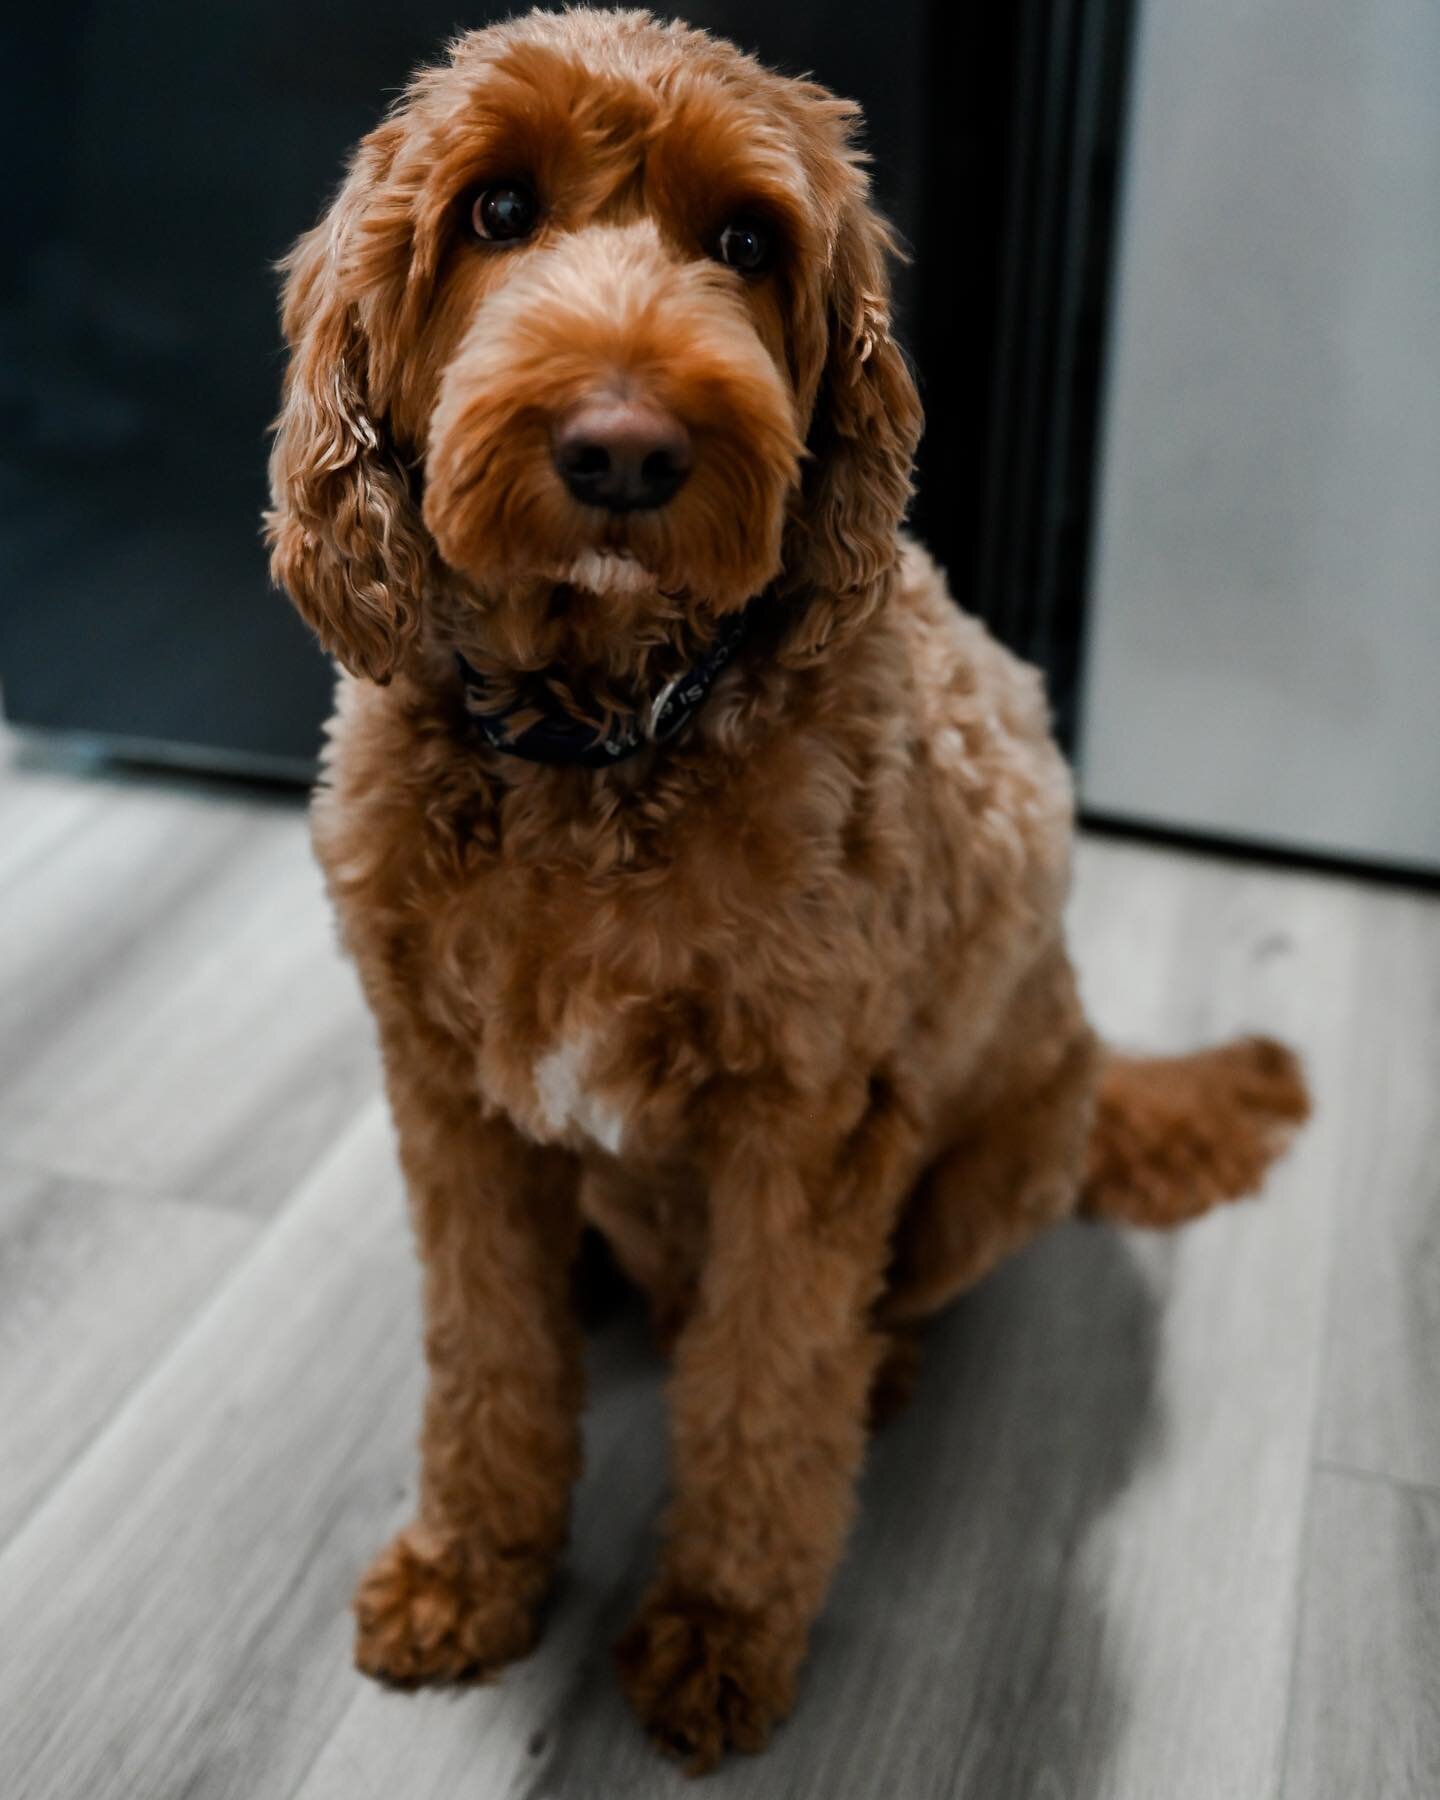 When your puppy is the cutest boy, you make him a part of your big day. Flynn you are such a sweet boy 🥰 @bdurn15 @timmysiegs @iconadiamondbeach @sayidohairandmakeup #goldendoodle #dogsofinstagram #ido #dogsinweddings #njphotographer #capemayphotogr